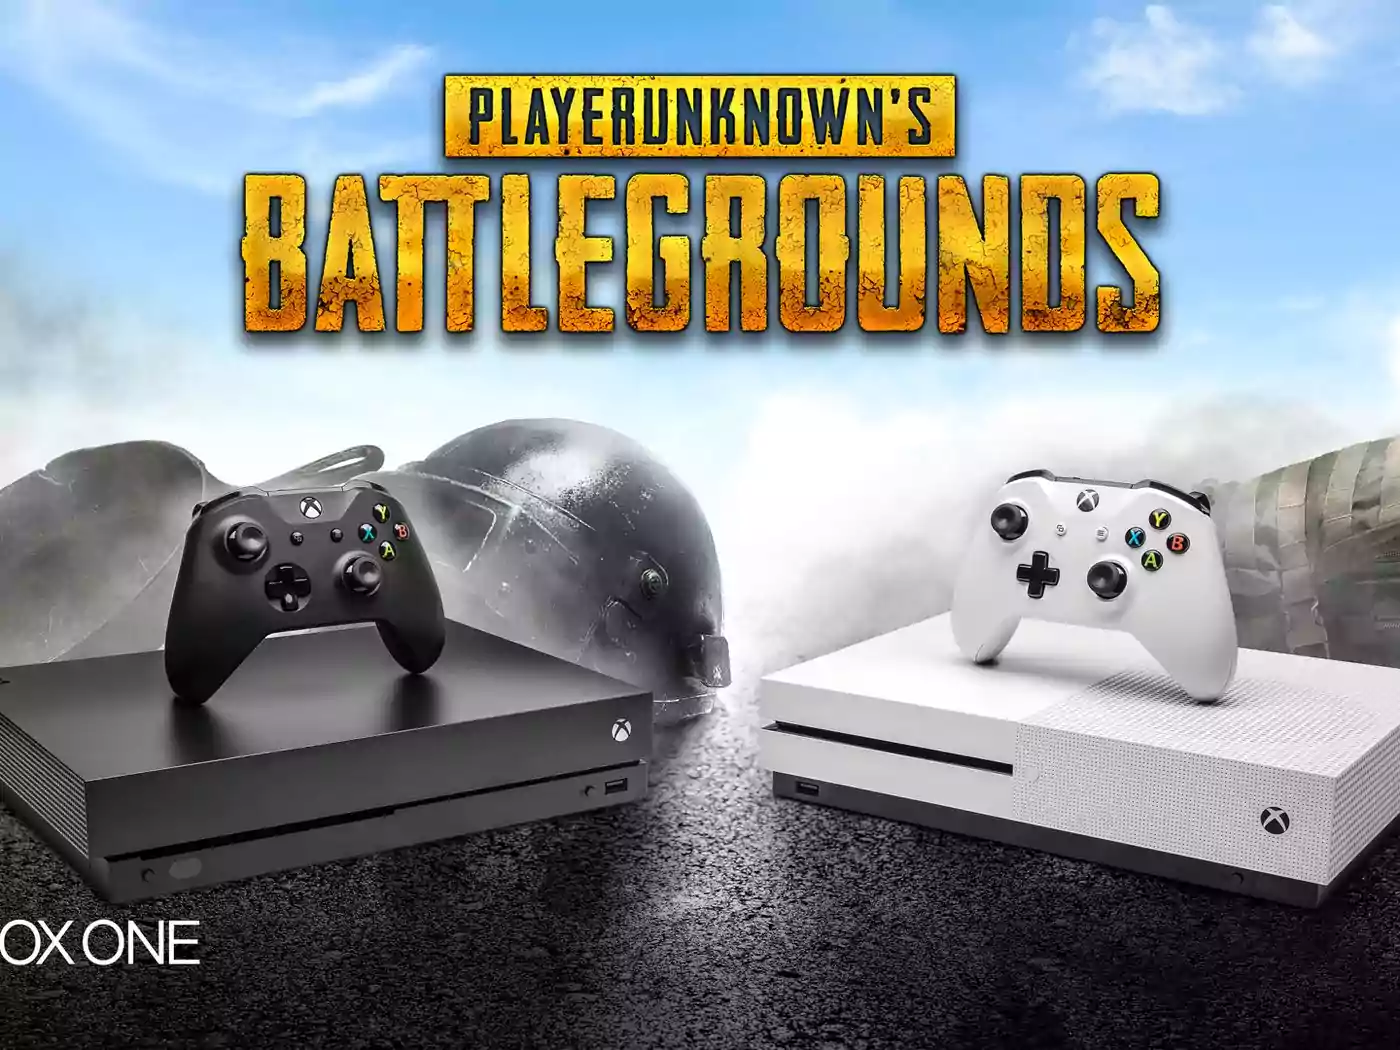 PUBG Console New Version Released And Sumer Sale 2020 Drops The Price Of The Game By 67%